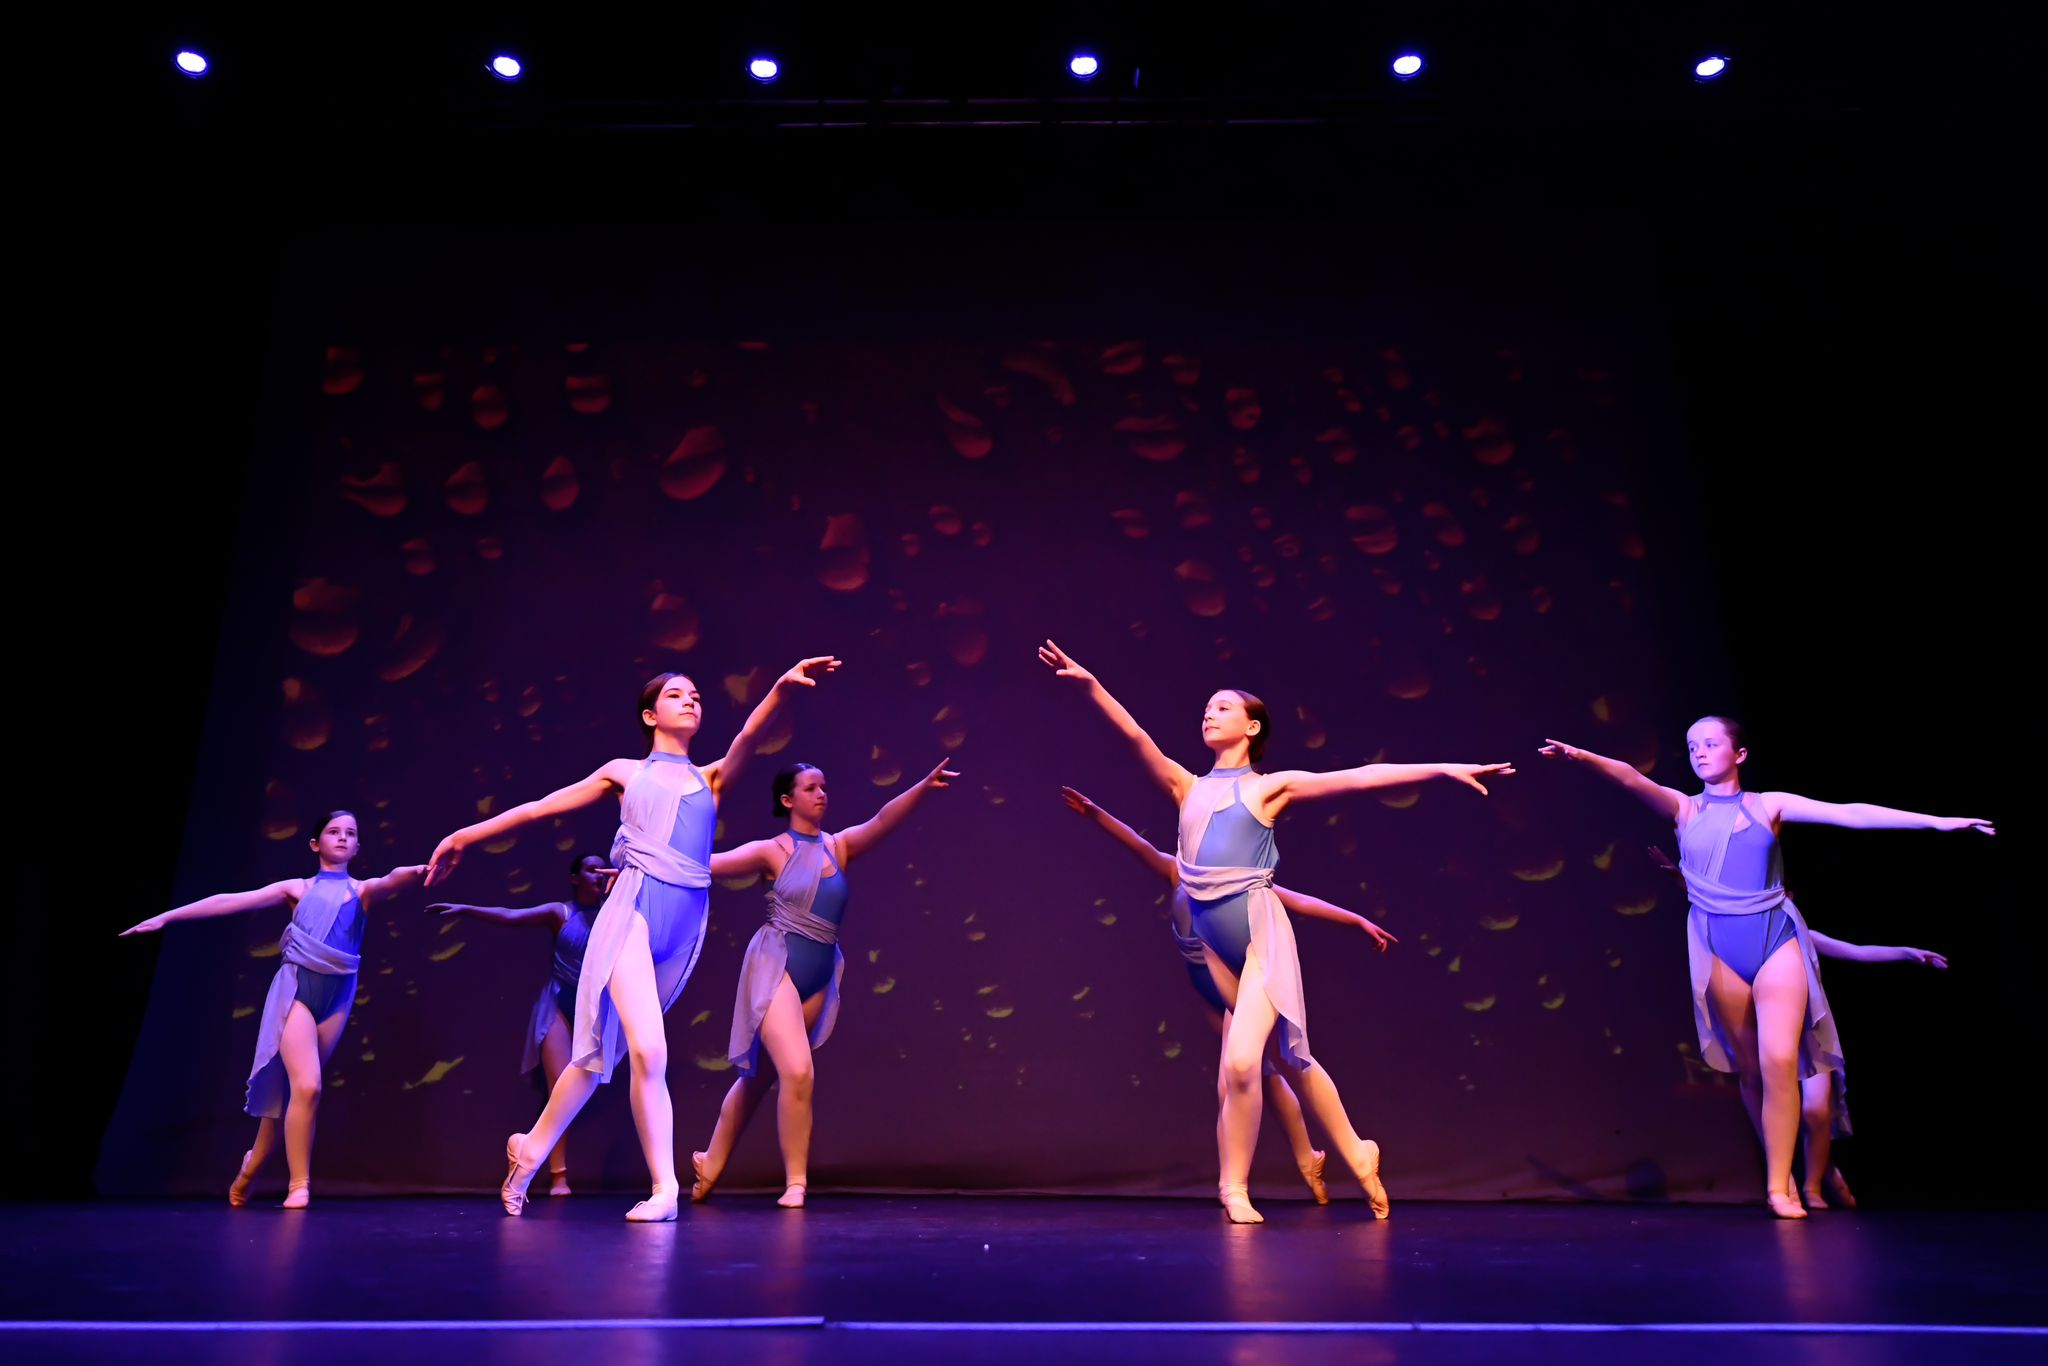 a group of young female contemporary ballet dance student in blue dresses perform modern ballet dance on stage at a ballet show for Ruth Shine School of Dance ballet academy in Dublin, Ireland